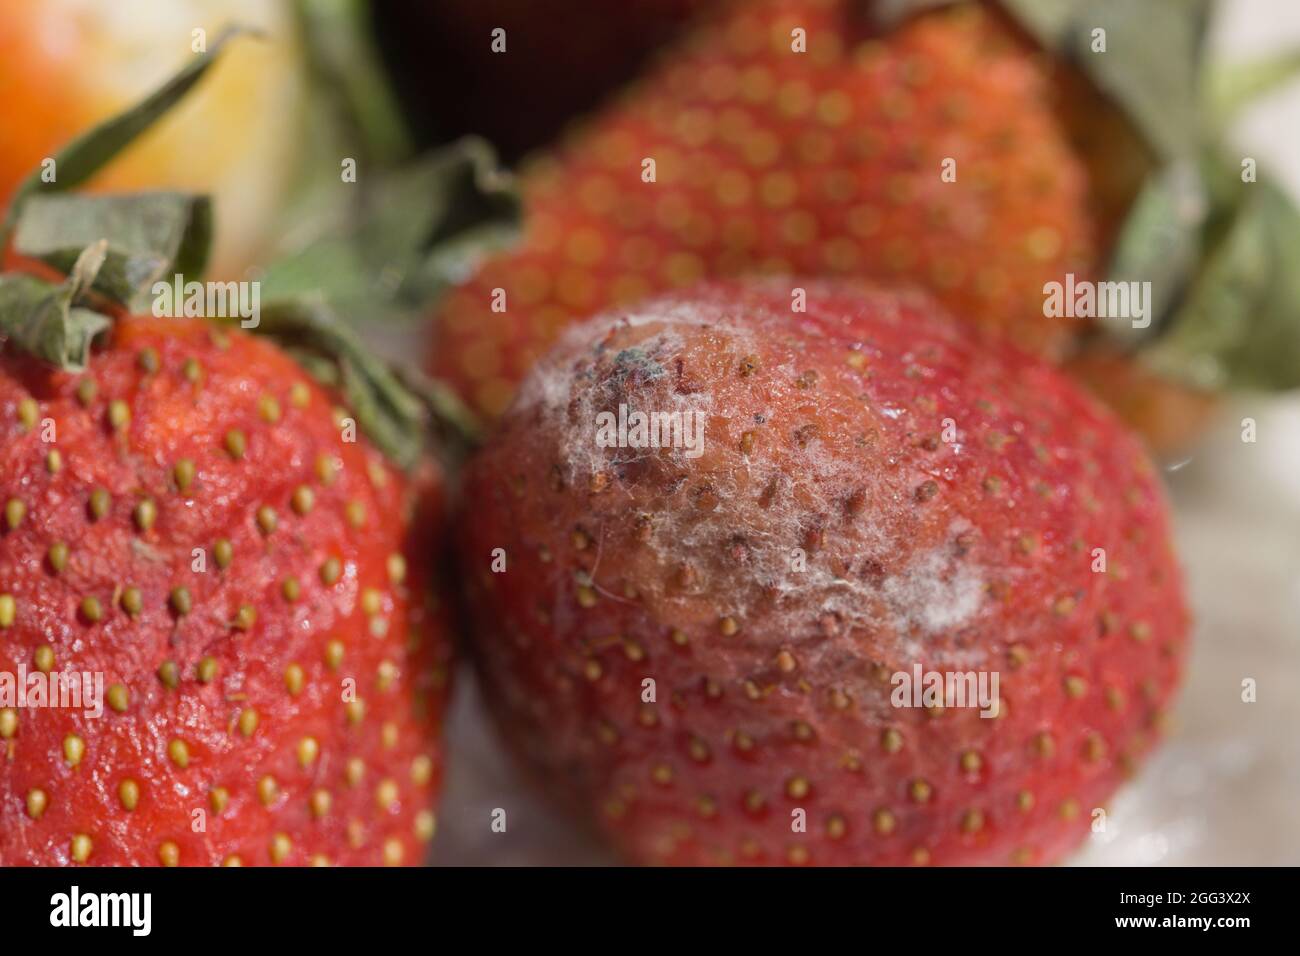 Close-up of some strawberries that have been spoiled due to the growth of the pathogenic fungus Botrytis cinerea, the gray mold that appears on the su Stock Photo